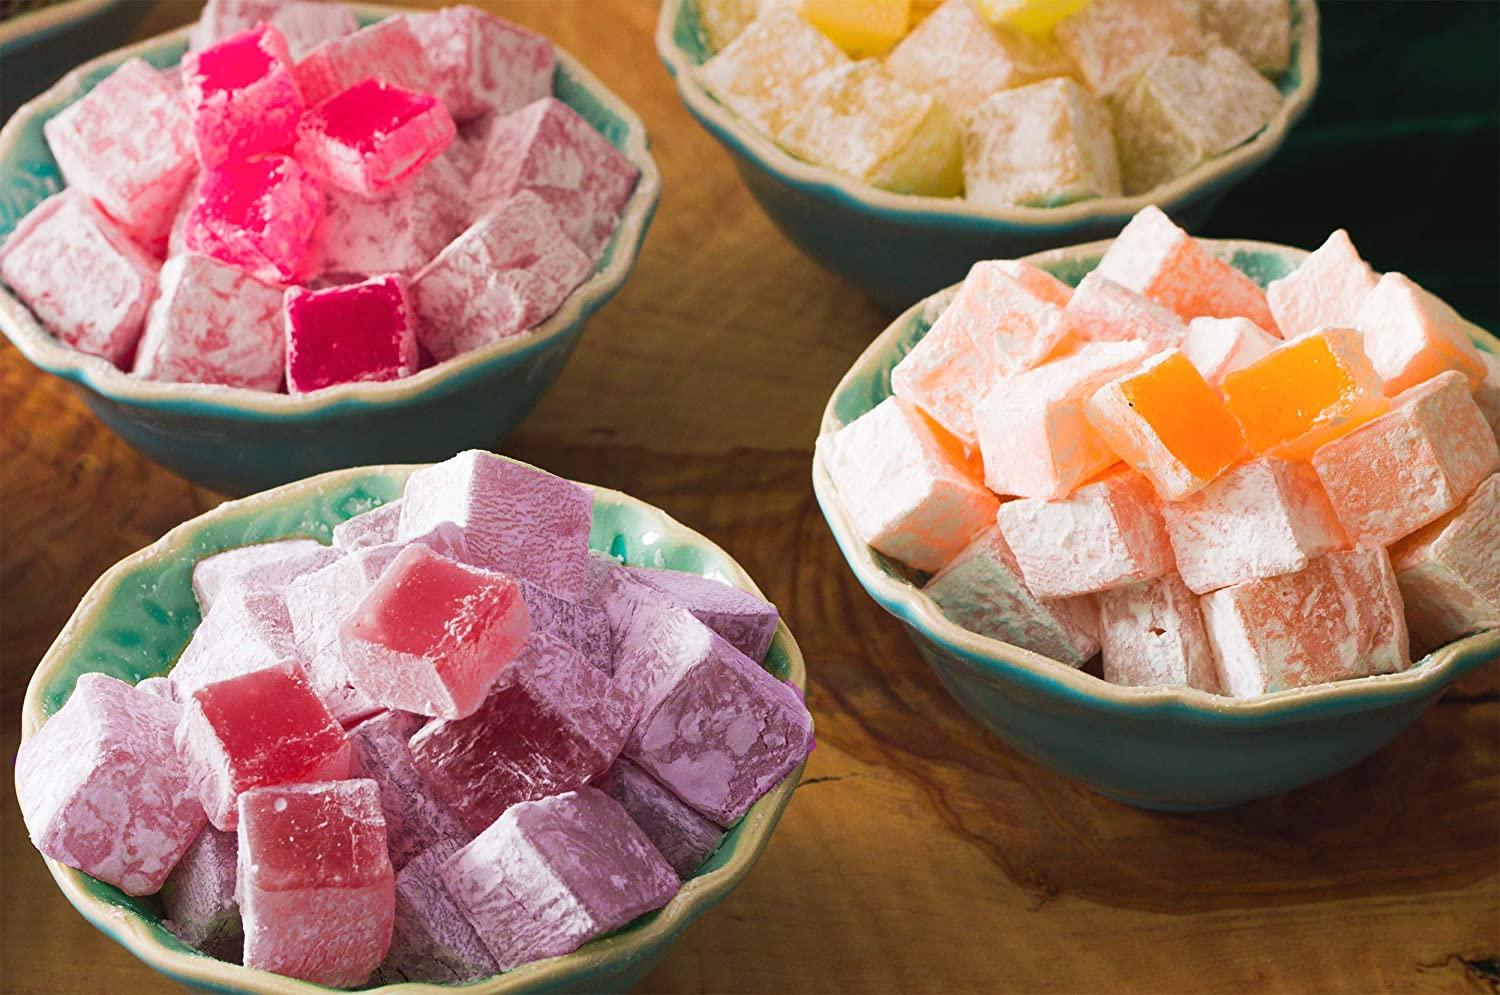 40 Best Australian Lollies, Candy, and Sweets